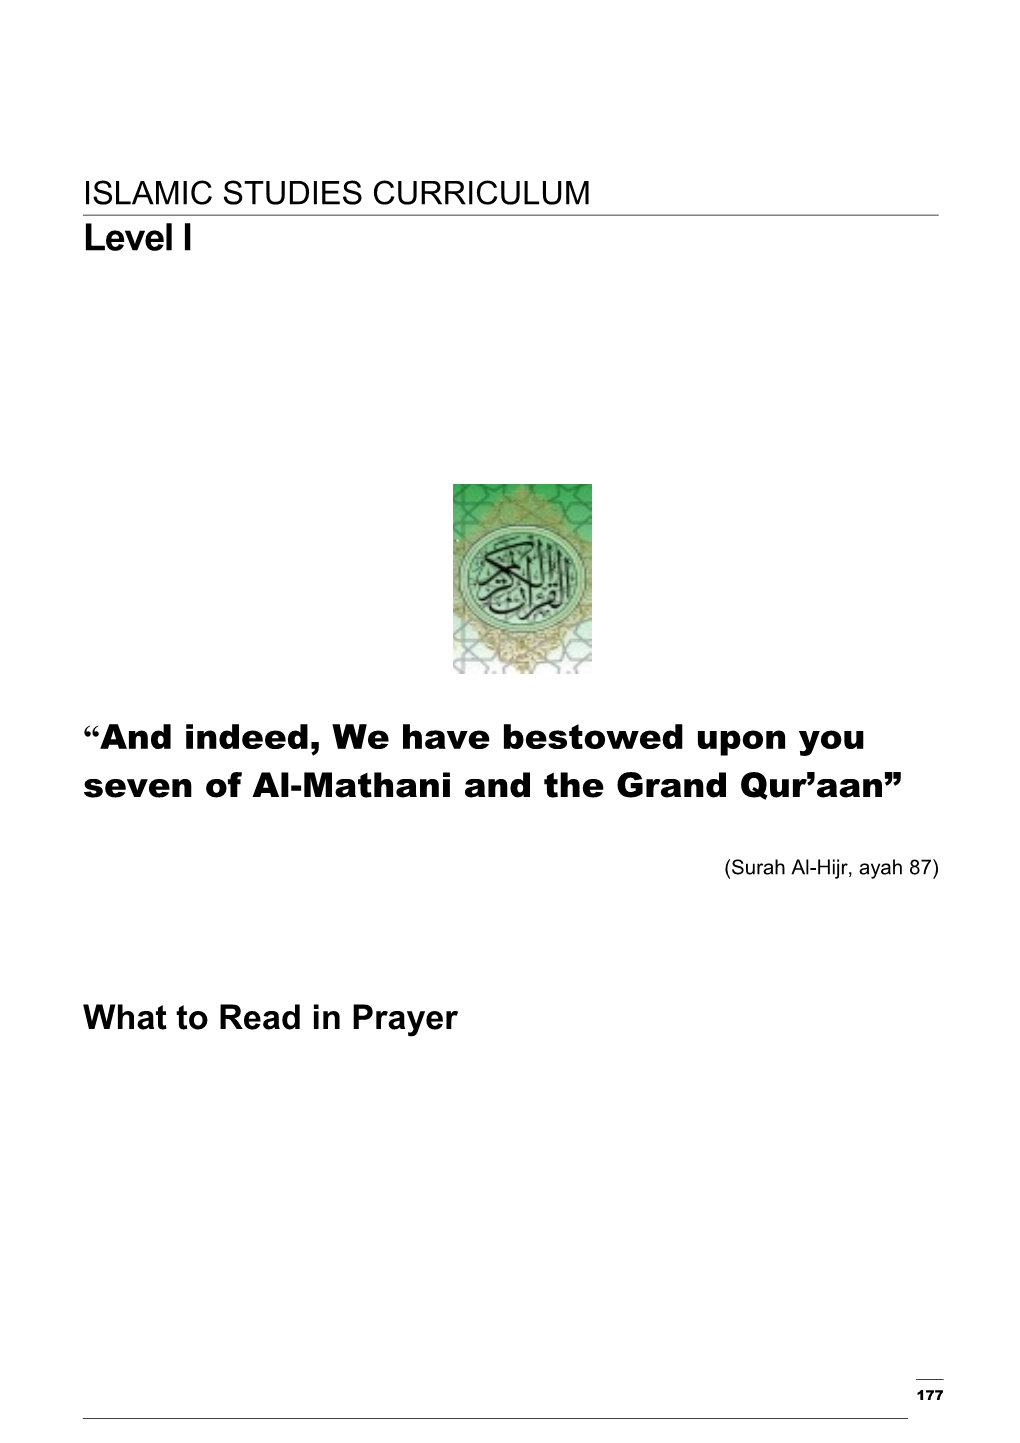 15 What To Read In Salah Level I Lessons 1-6